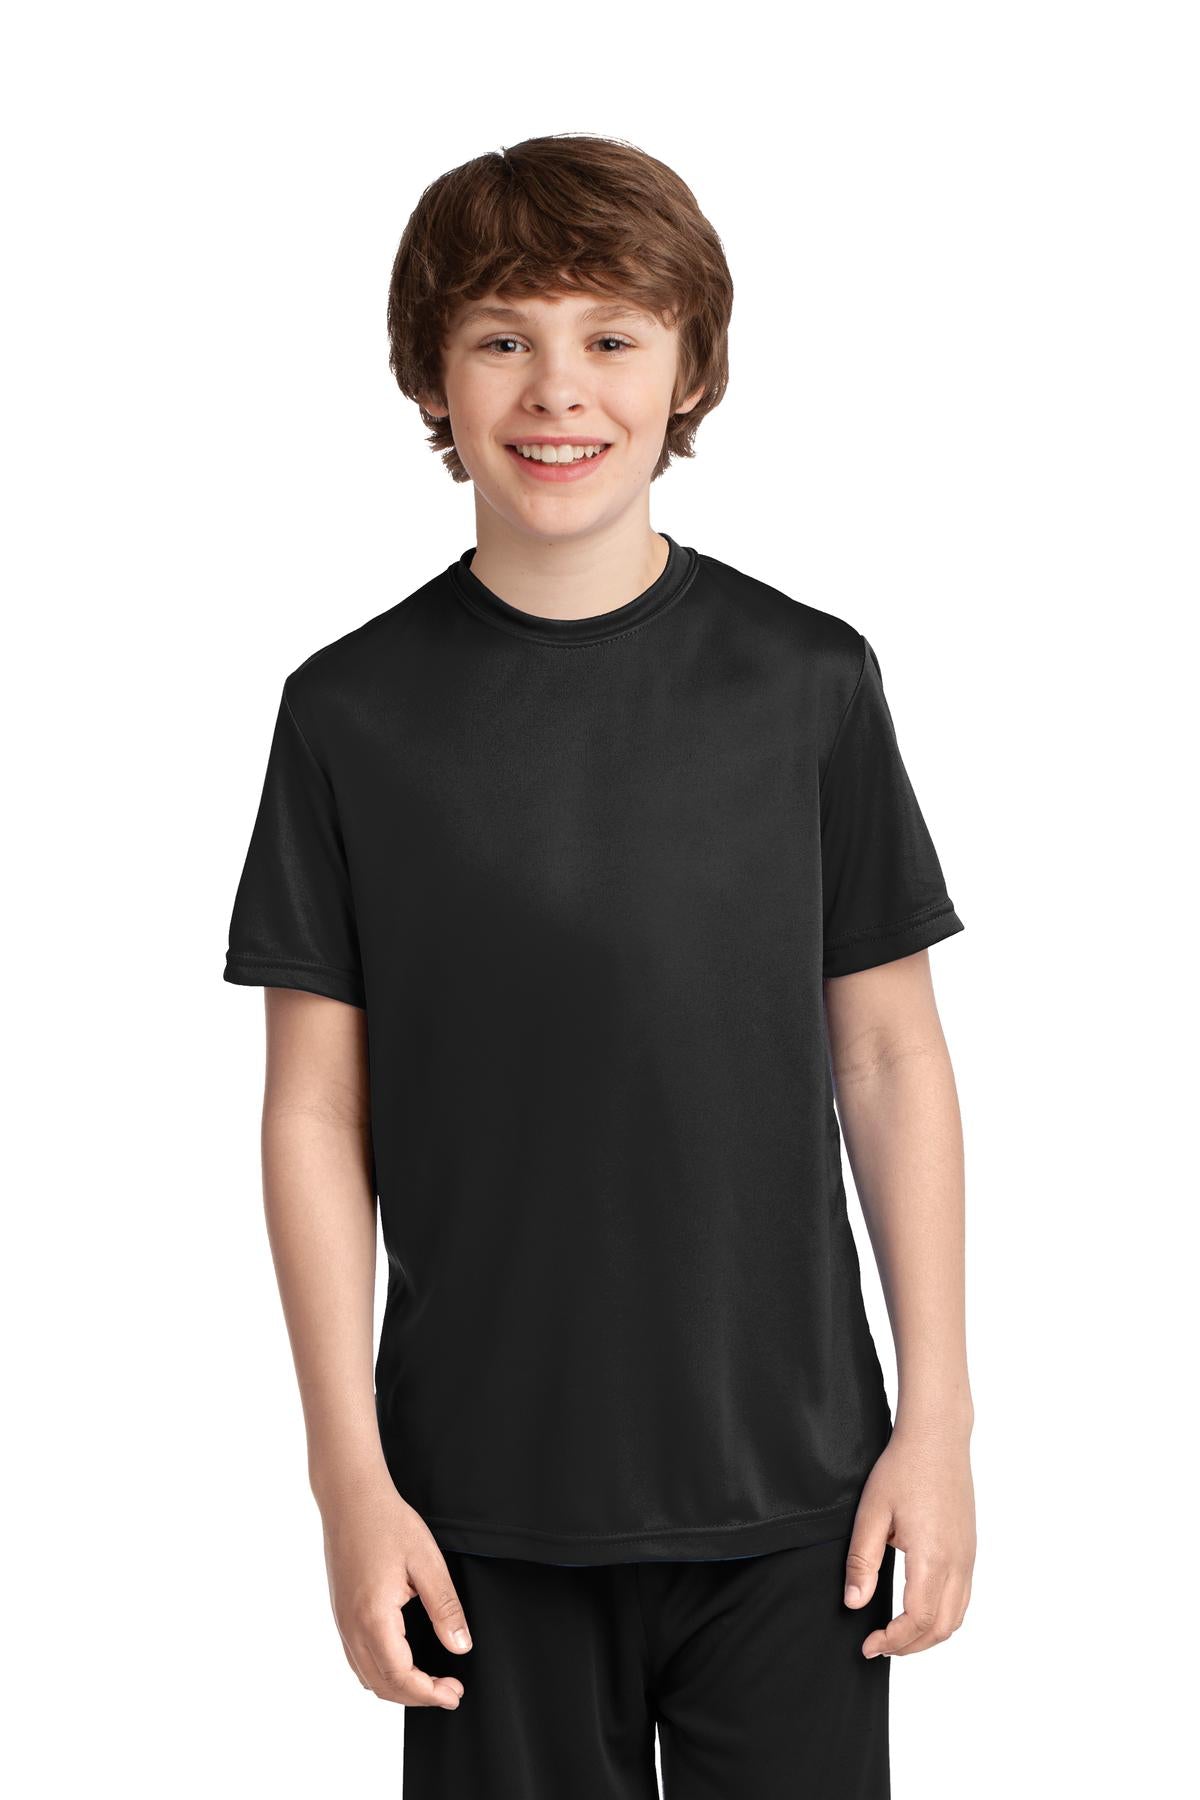 Port & Company® Youth Performance Tee. PC380Y